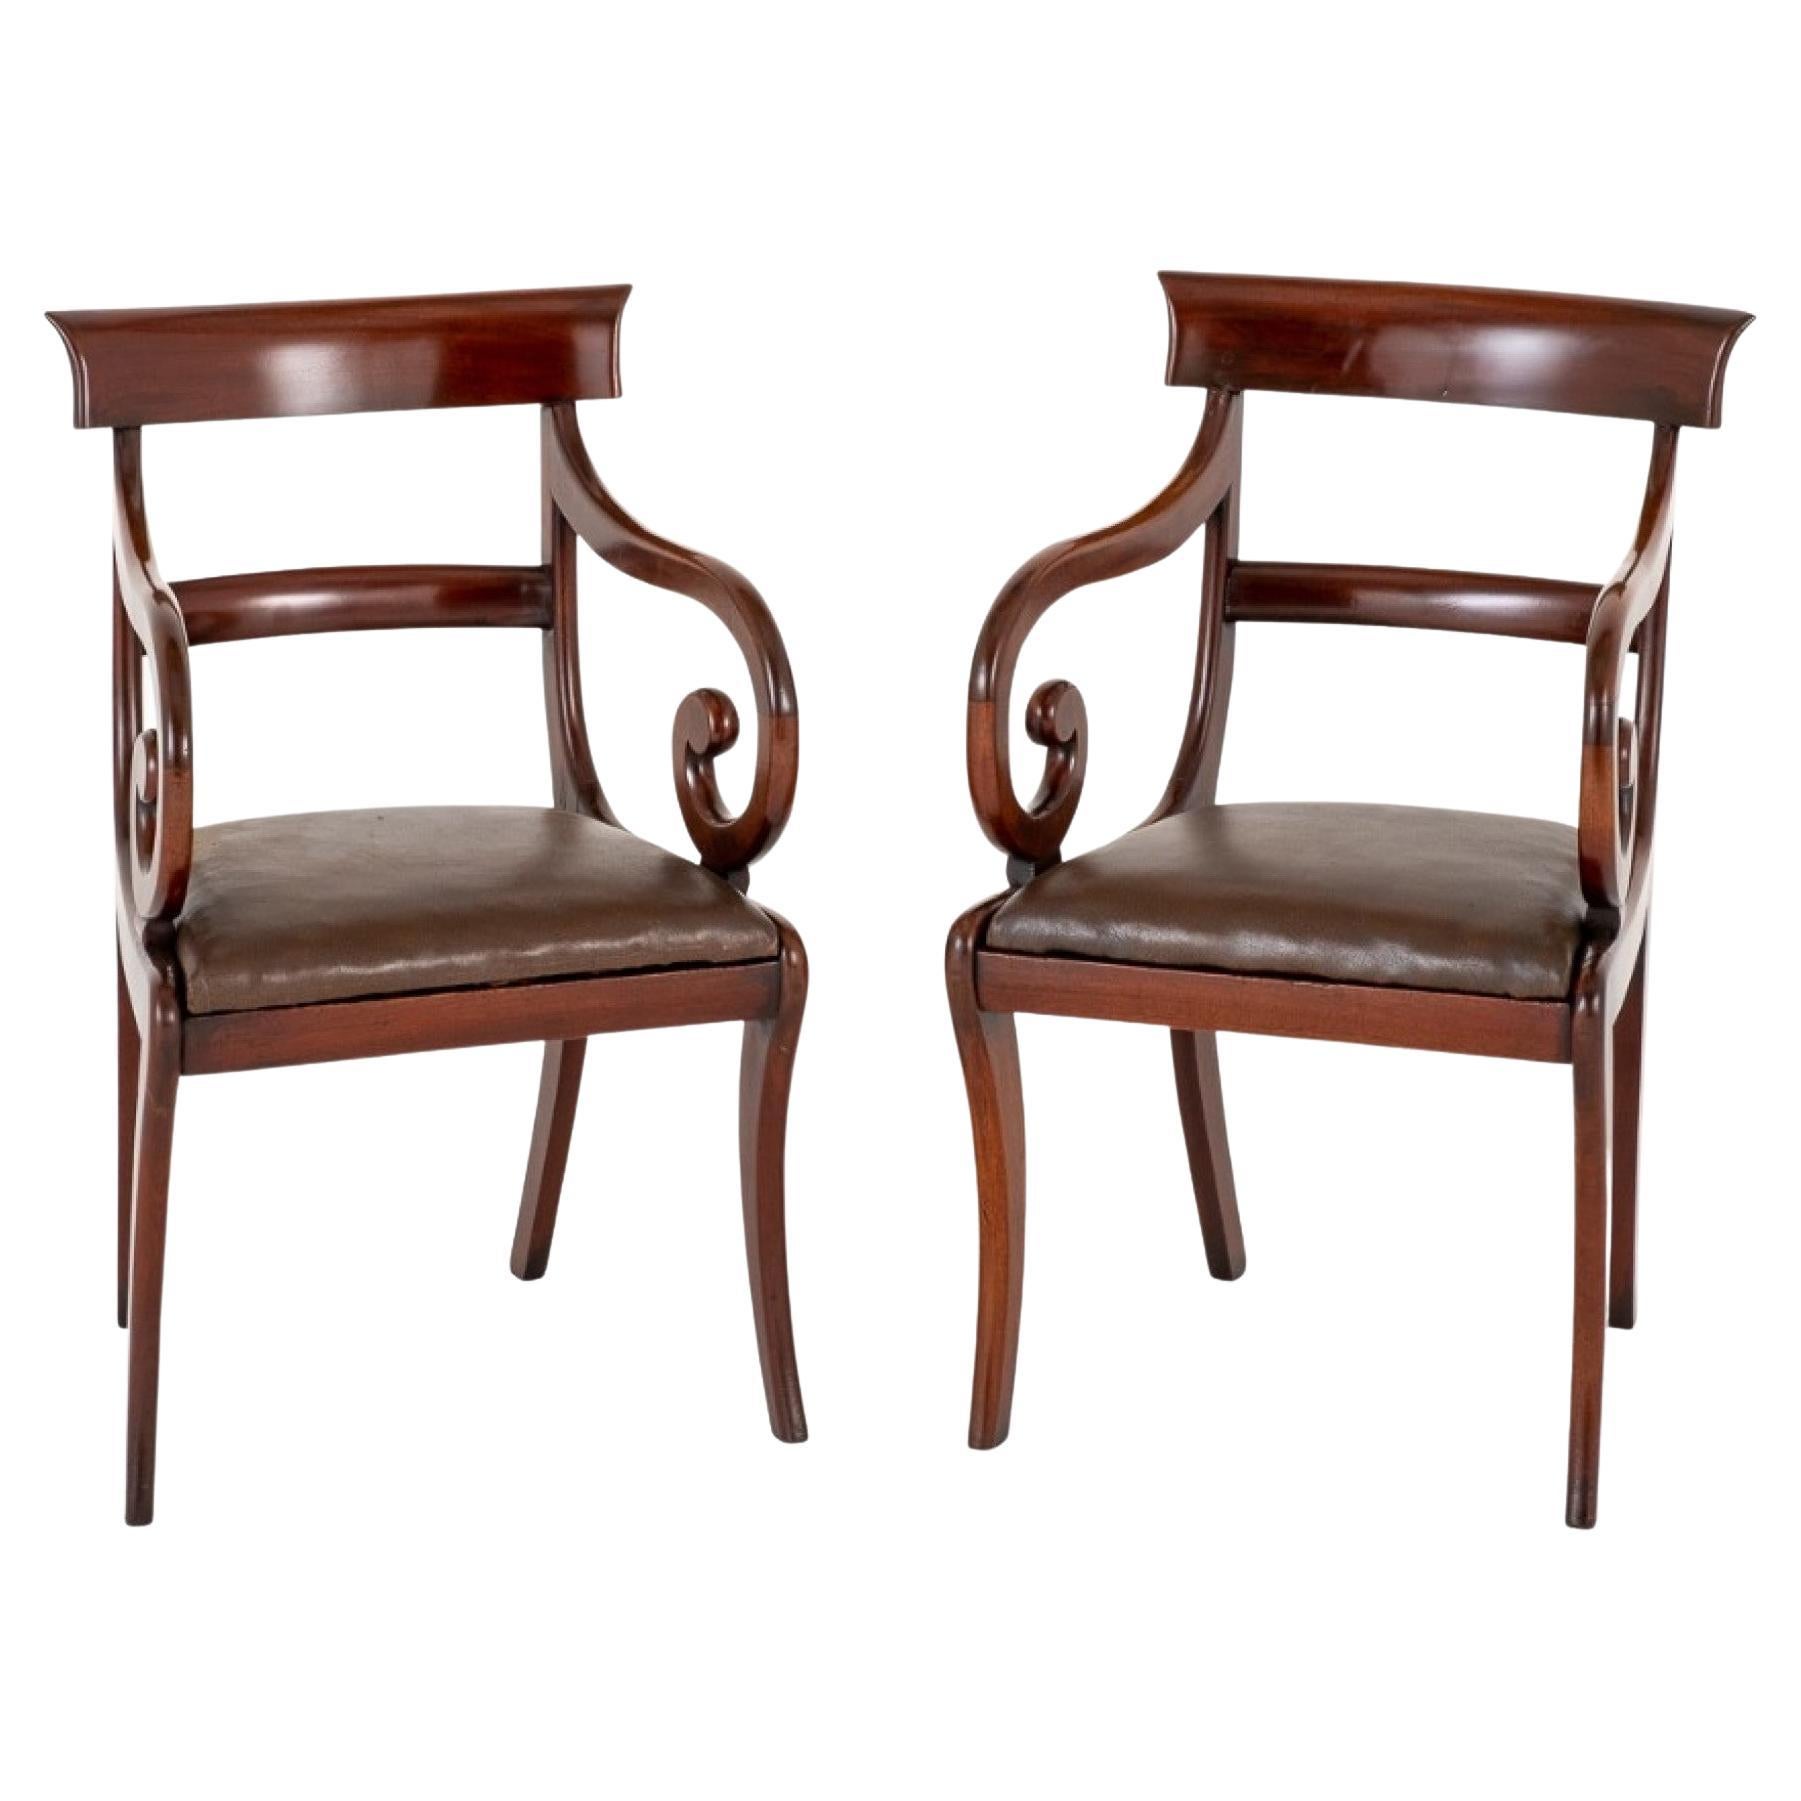 Pair Regency Elbow Chairs Mahogany Period Furniture